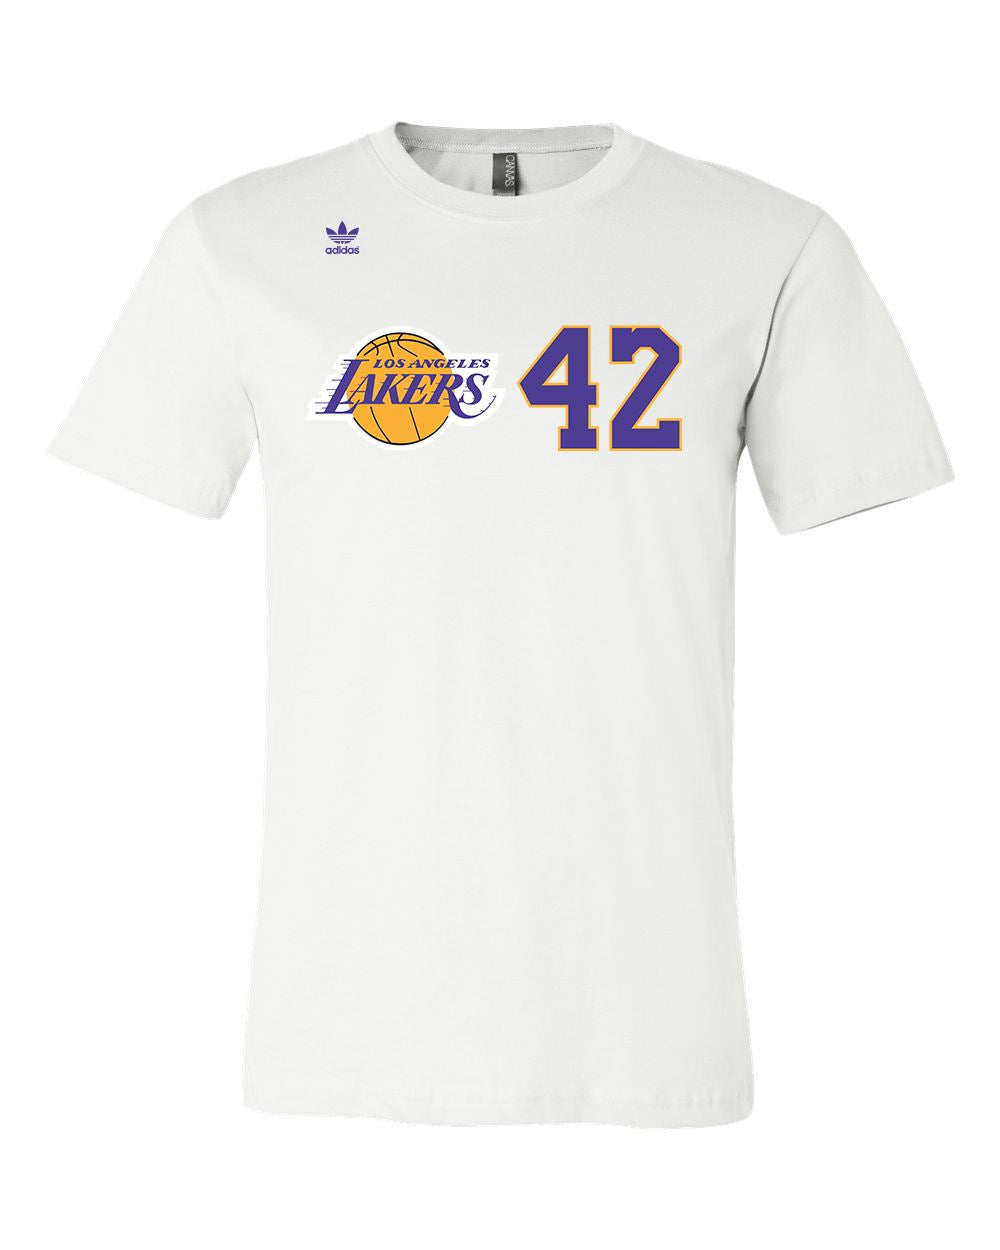 James Worthy Los Angeles Lakers #42 Jersey player shirt